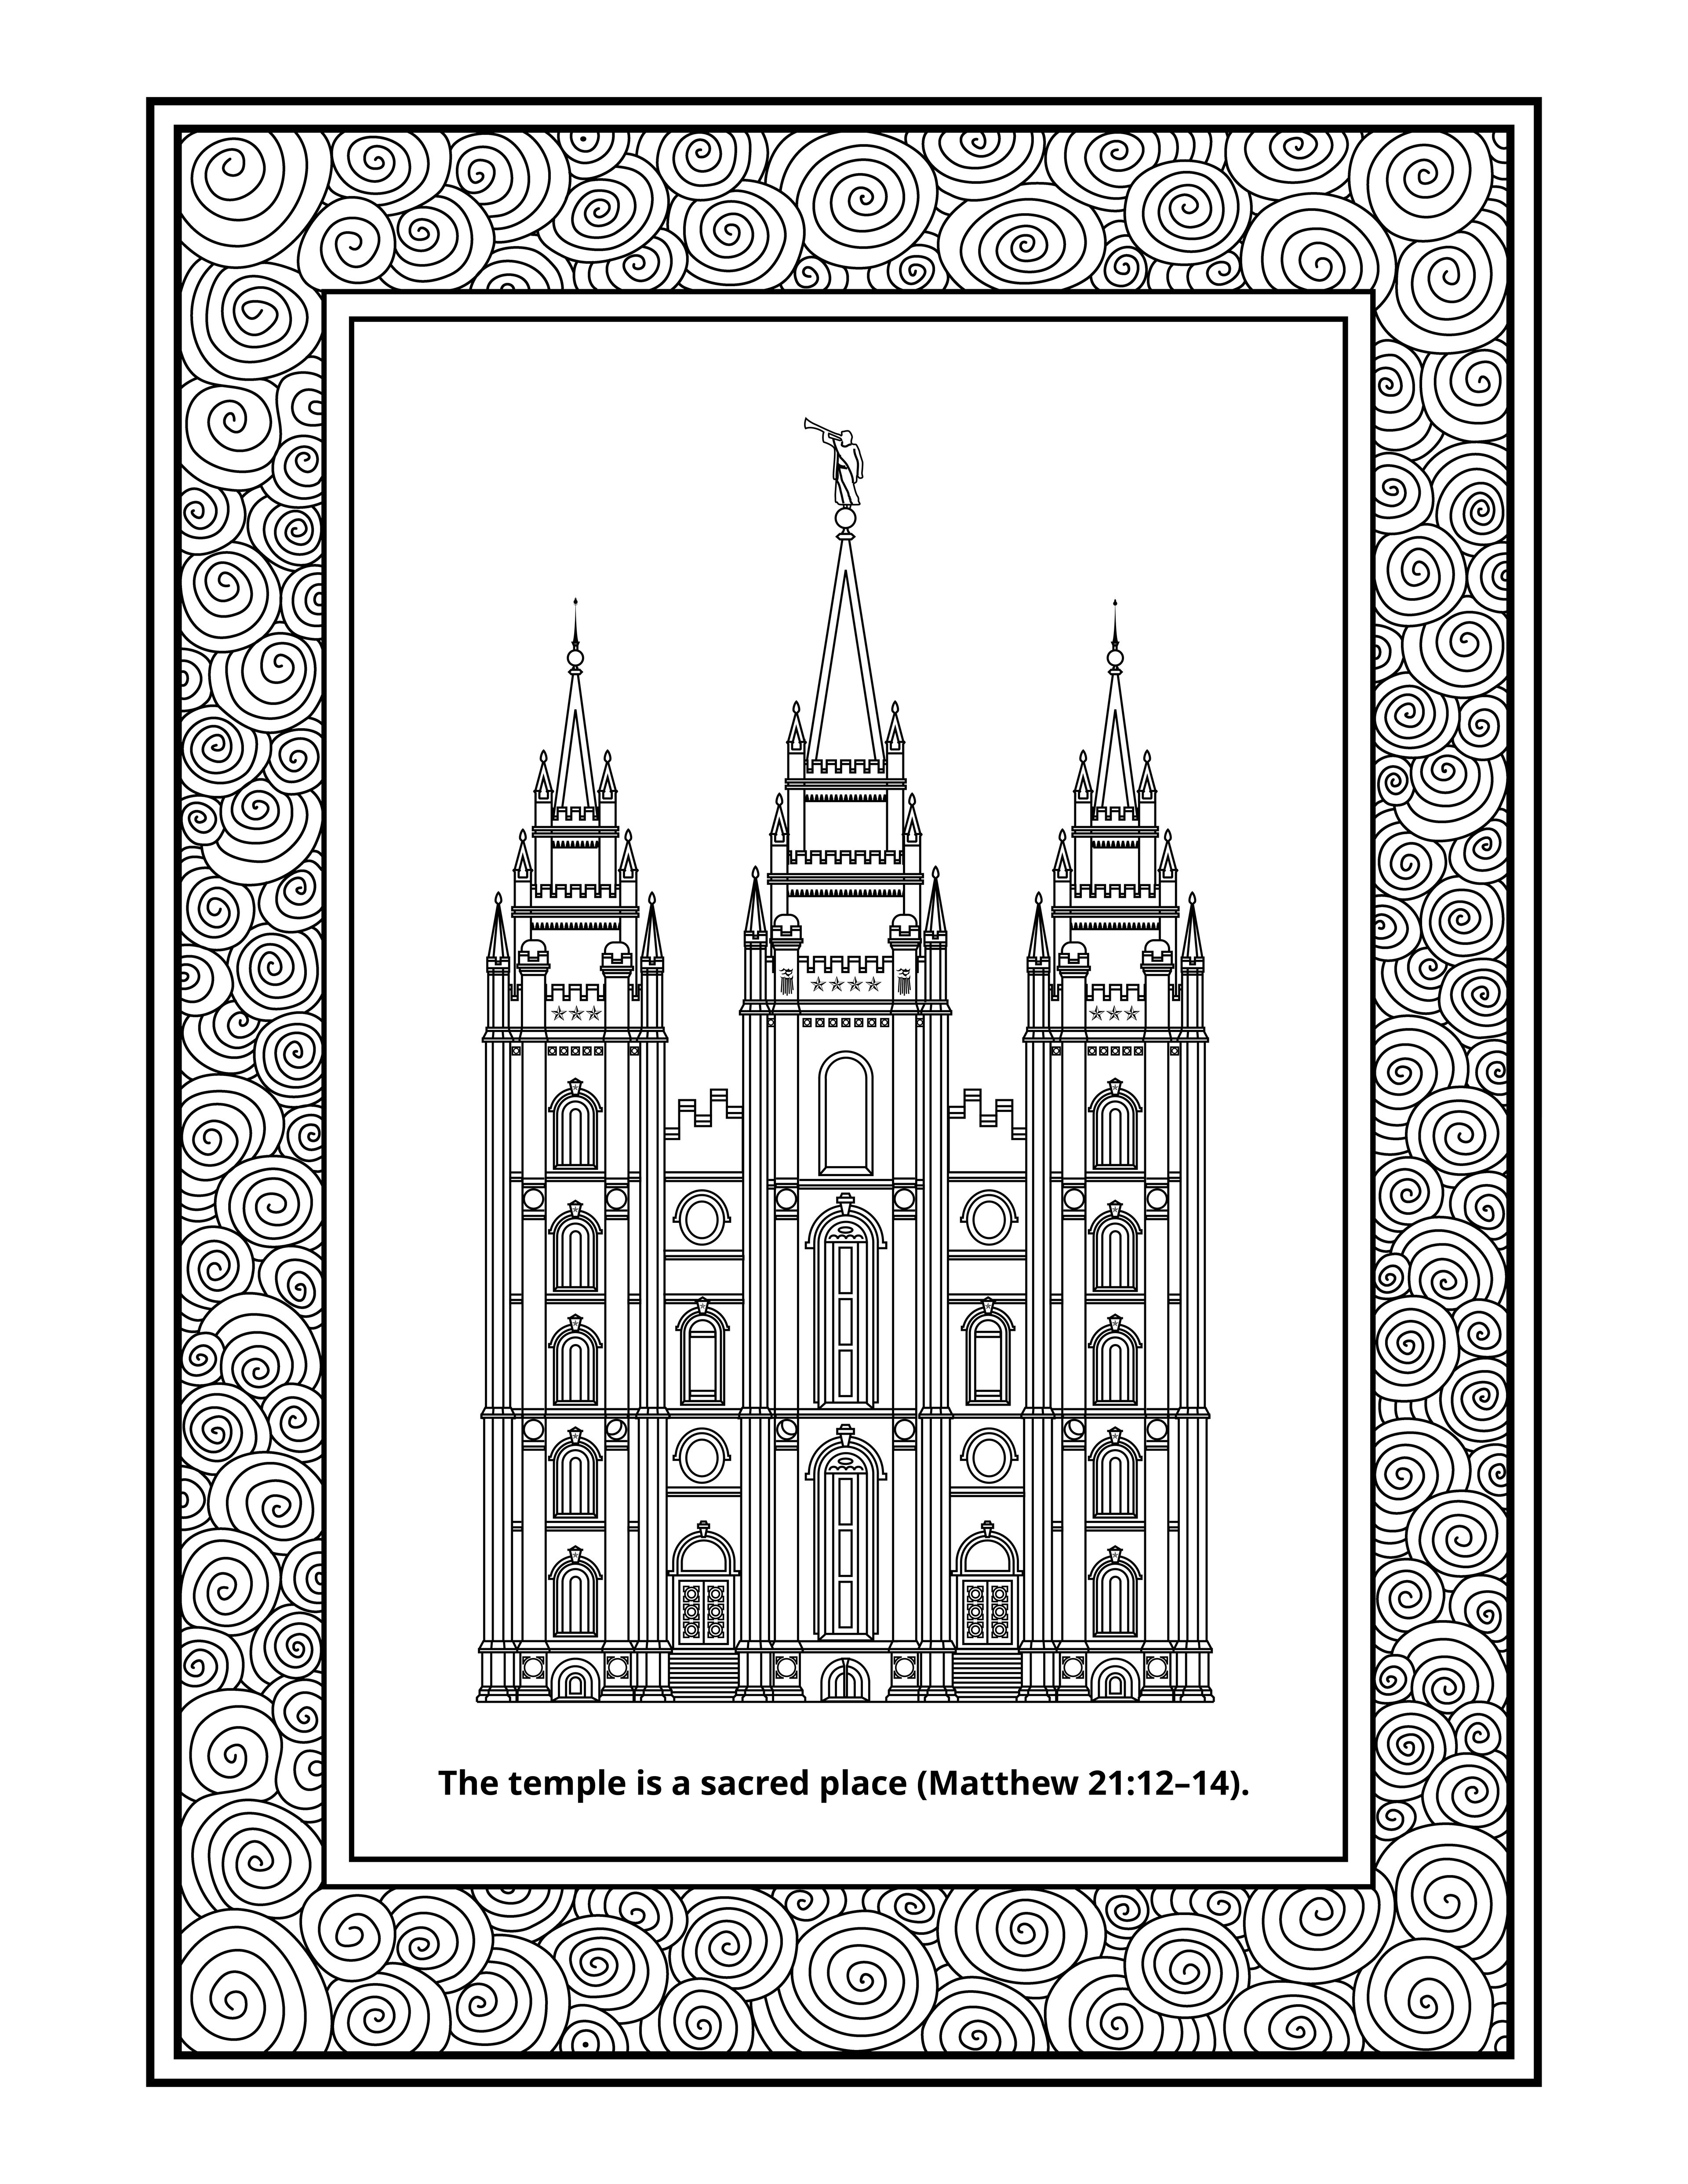 A line drawing of the Salt Lake Temple.